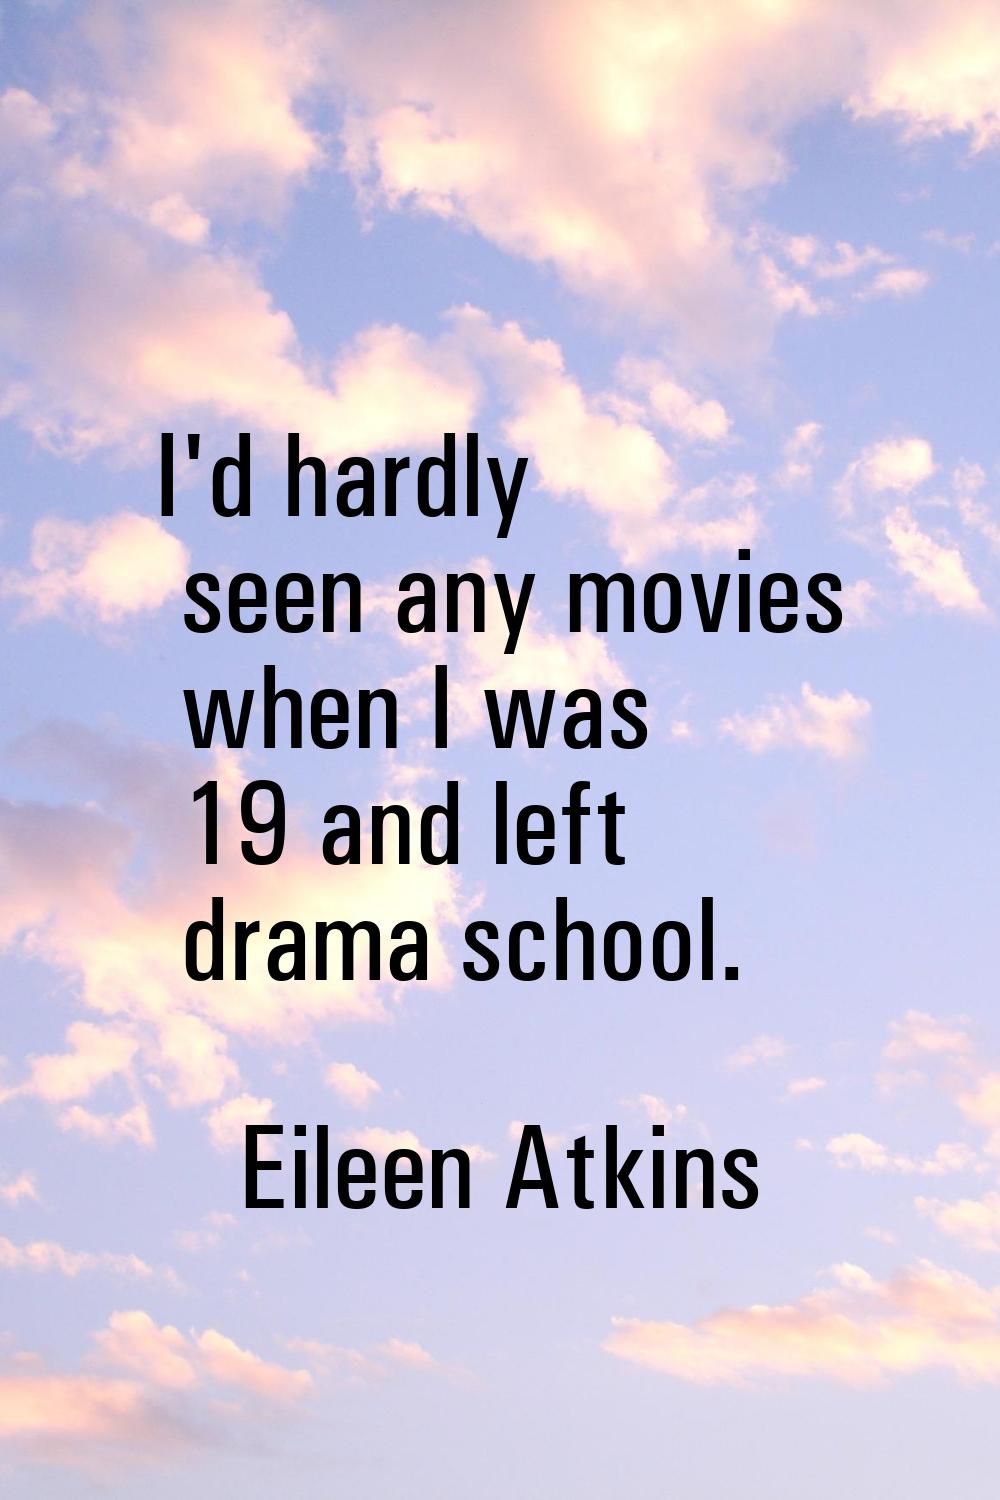 I'd hardly seen any movies when I was 19 and left drama school.